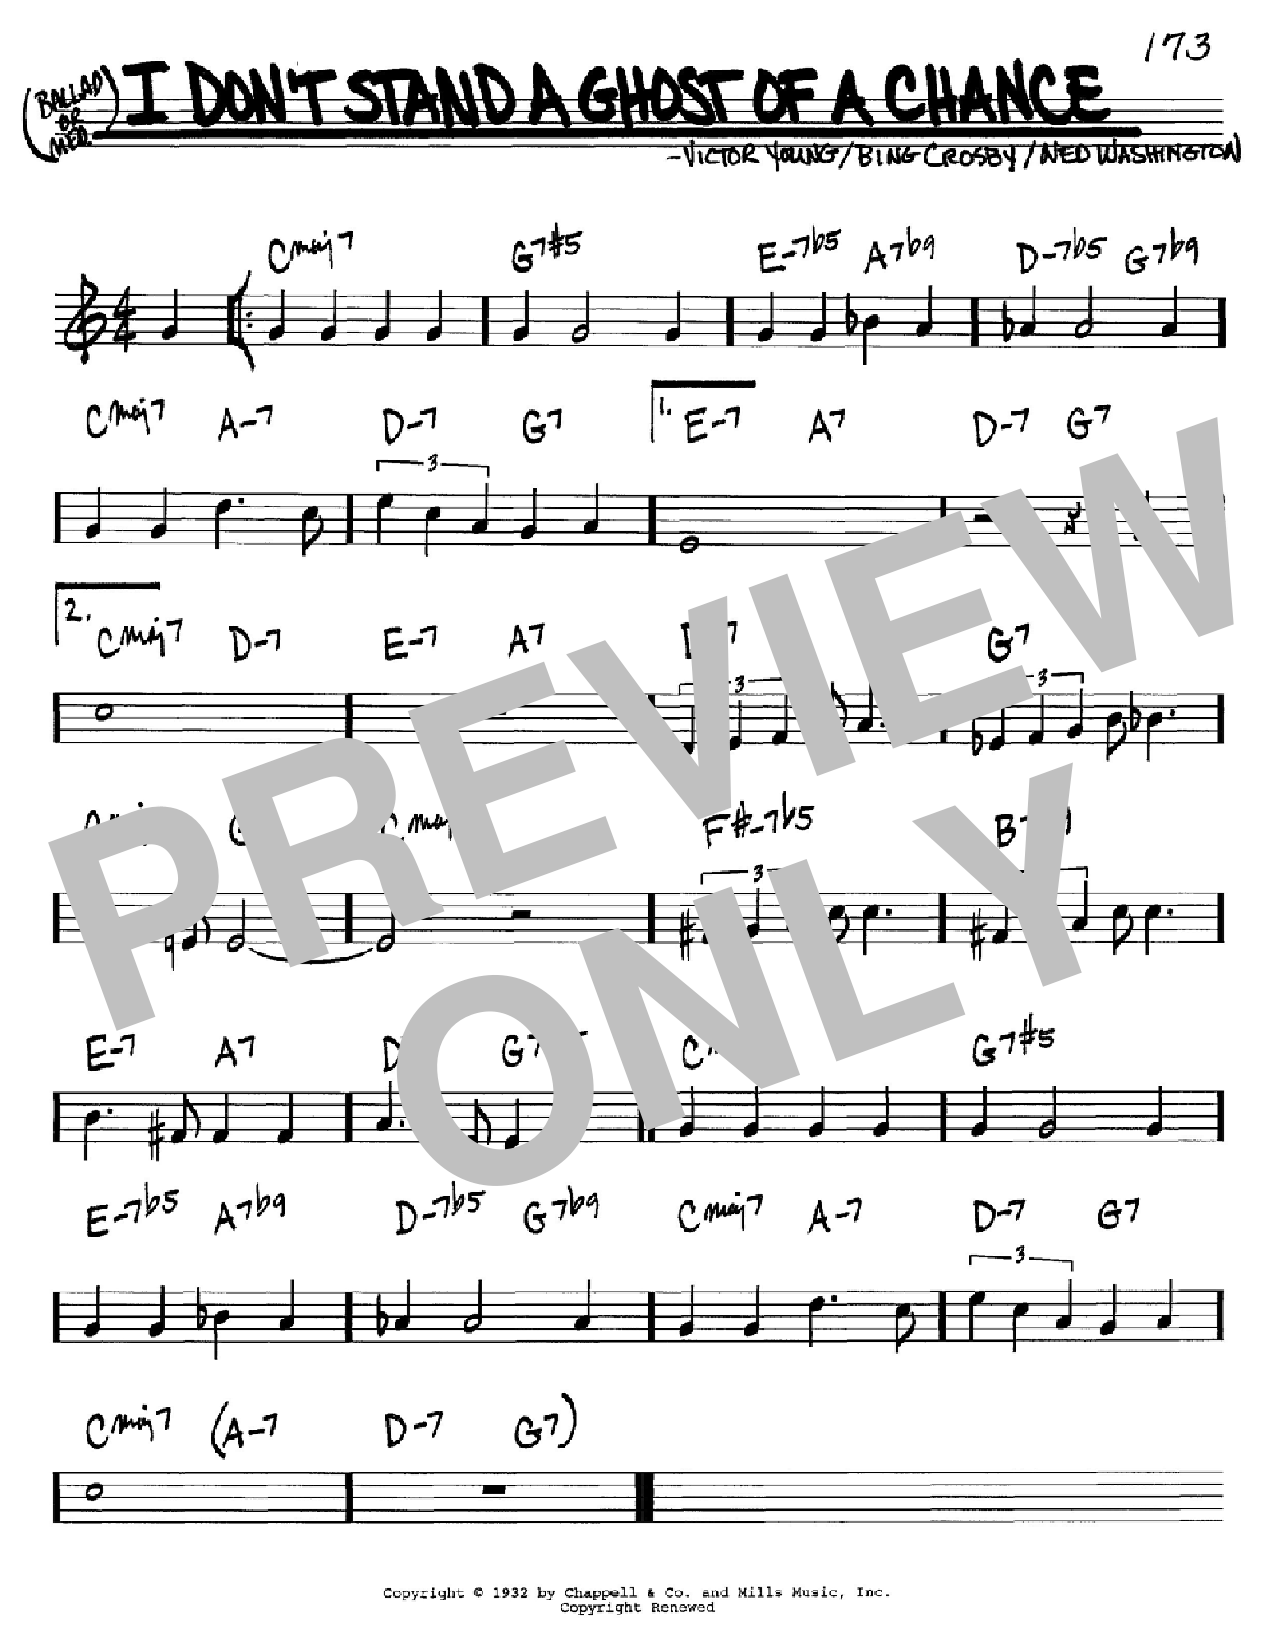 Download Bing Crosby I Don't Stand A Ghost Of A Chance Sheet Music